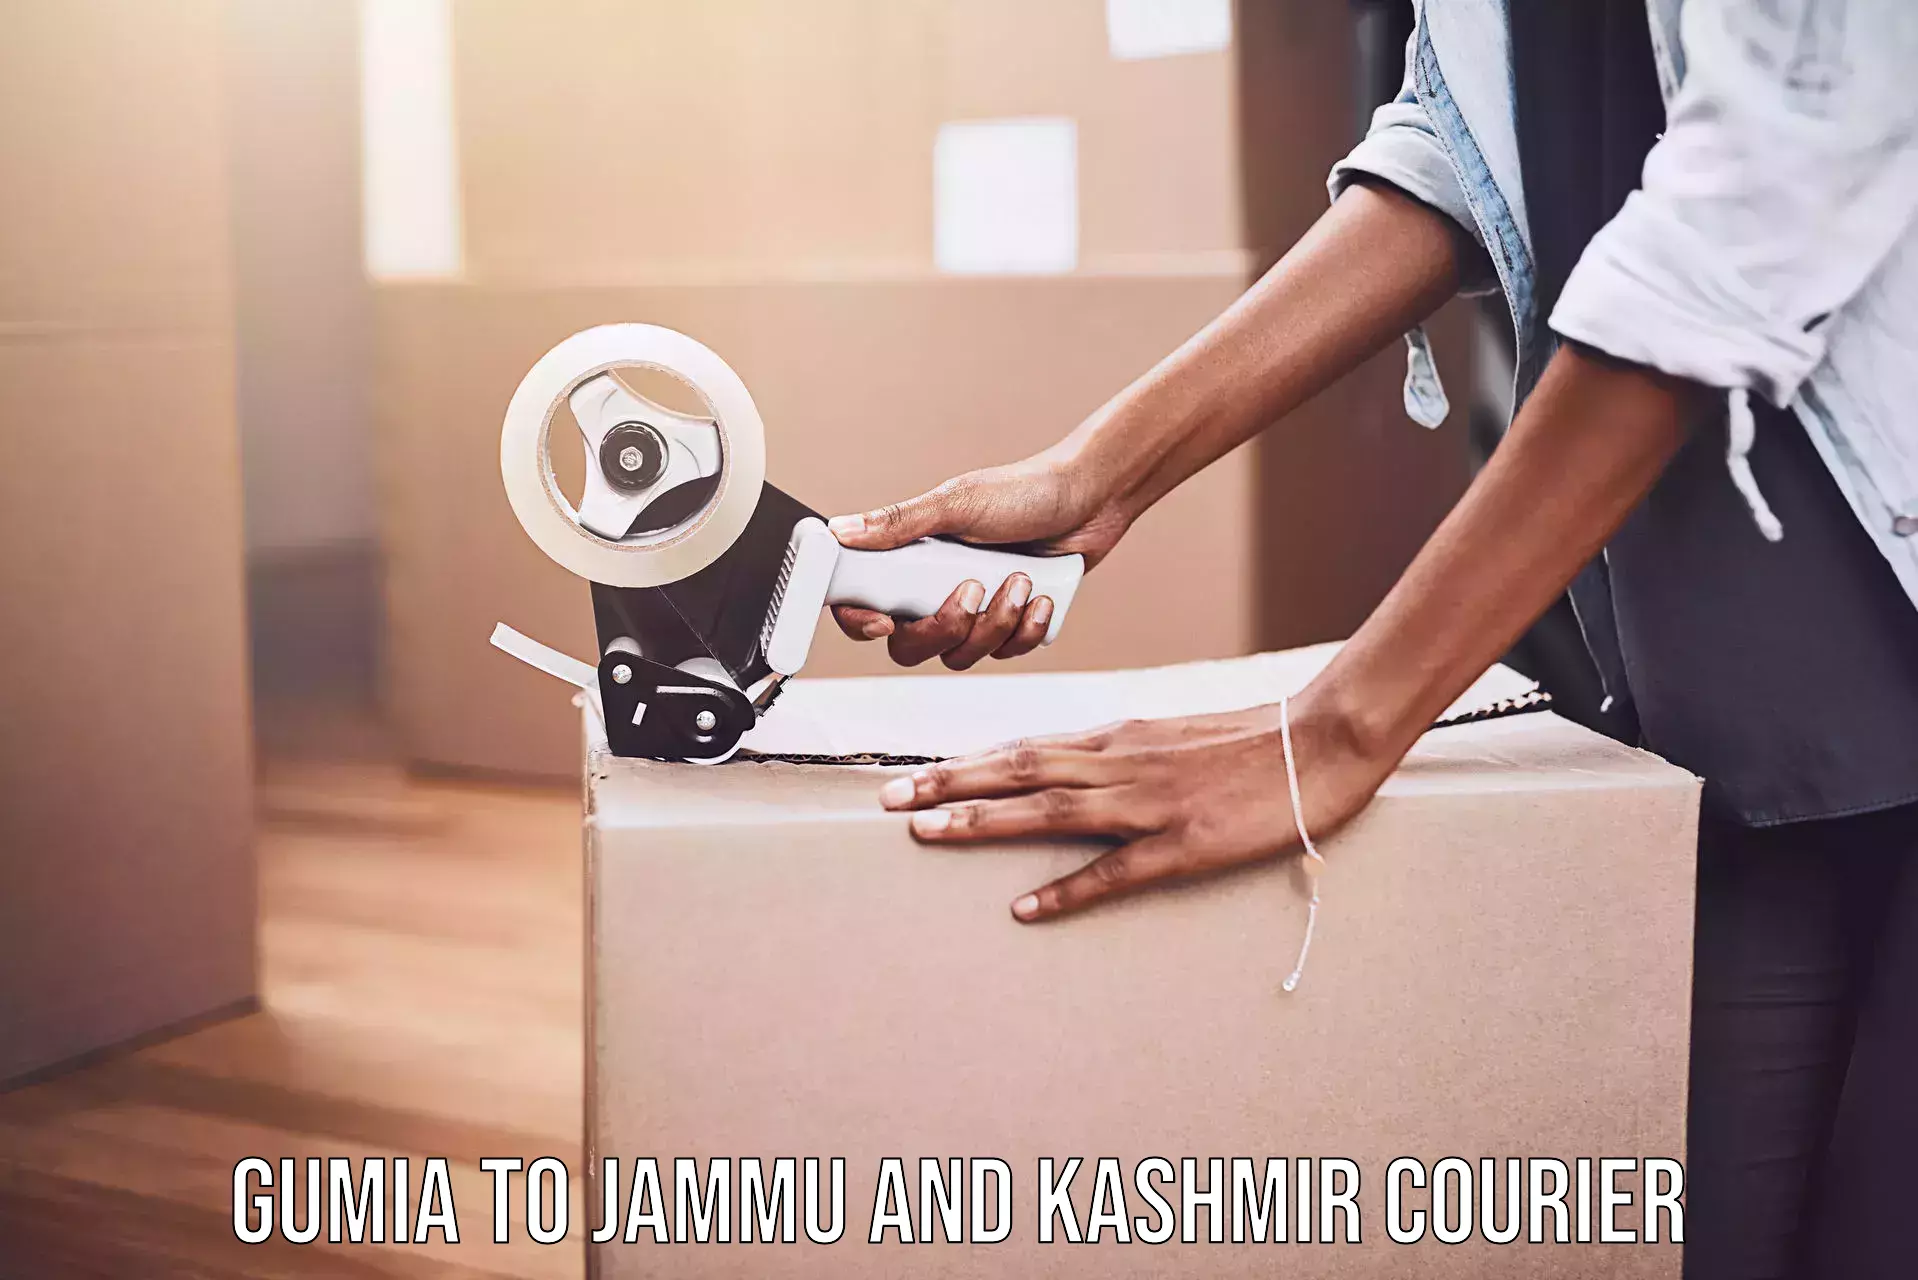 Specialized shipment handling Gumia to Jammu and Kashmir